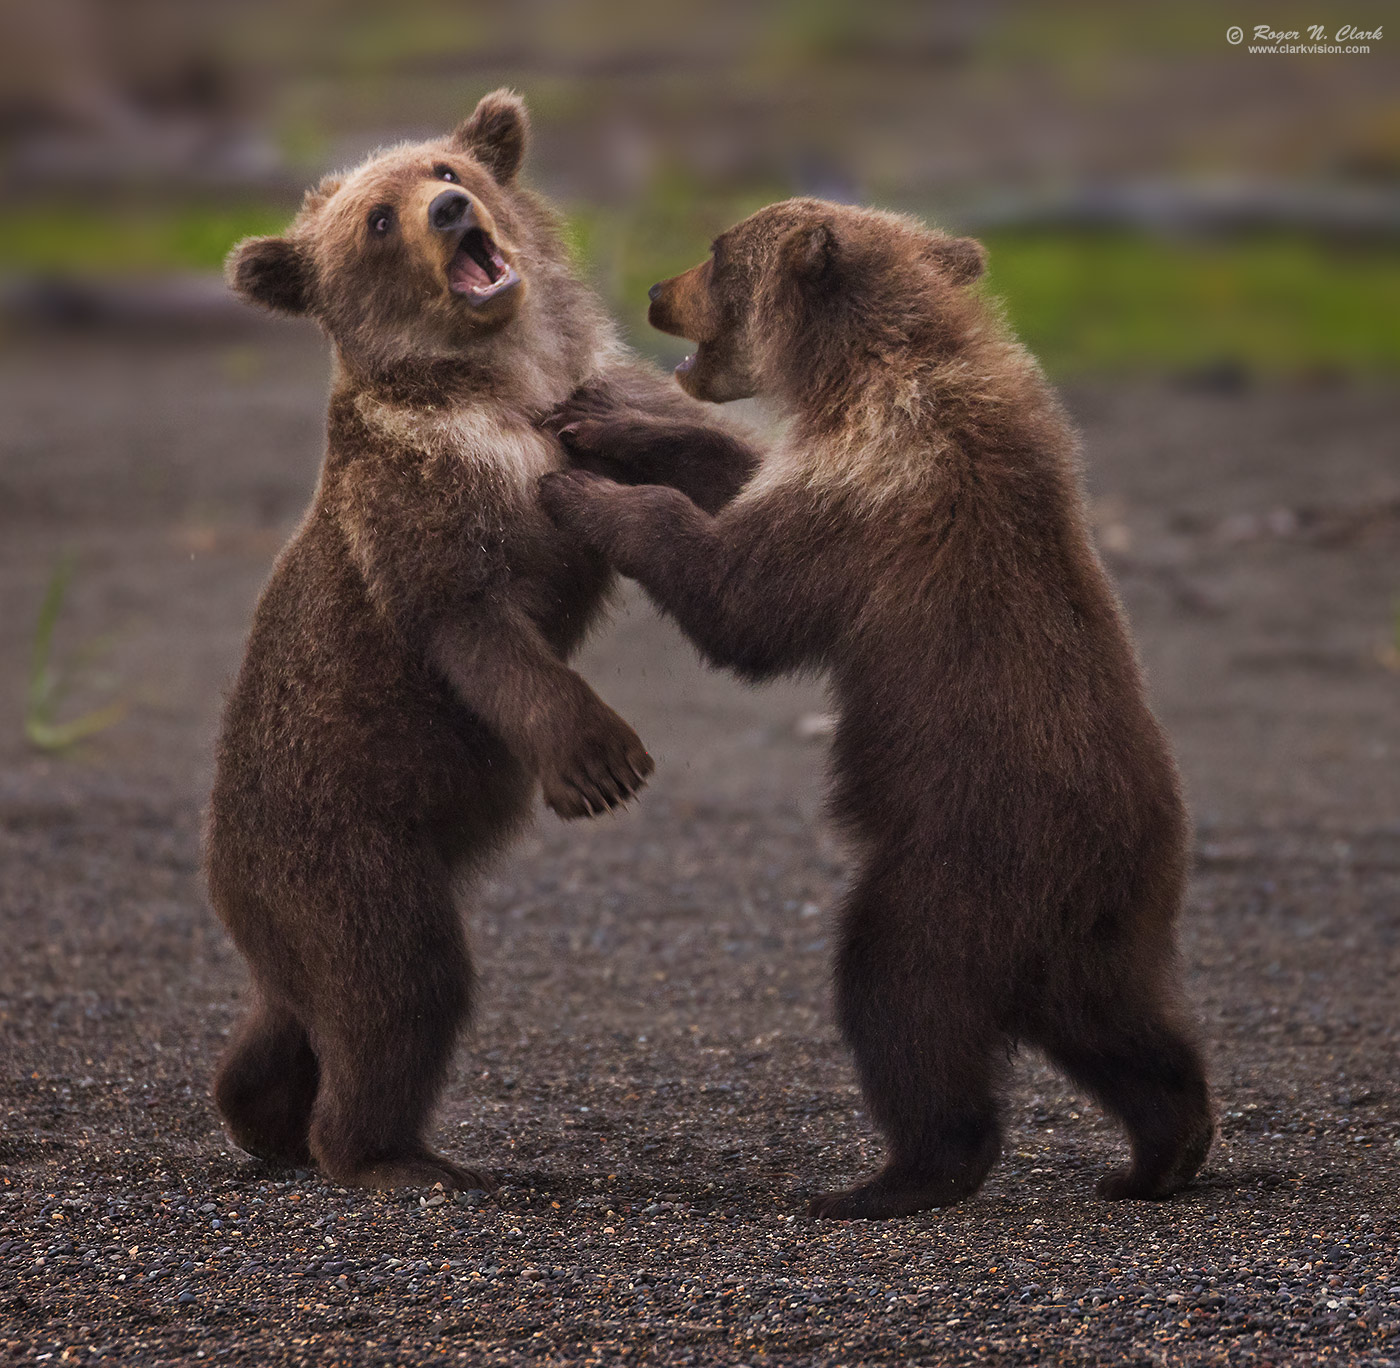 image bear-cubs-fighting-c08-25-2023-4C3A2115.d-1400s.jpg is Copyrighted by Roger N. Clark, www.clarkvision.com